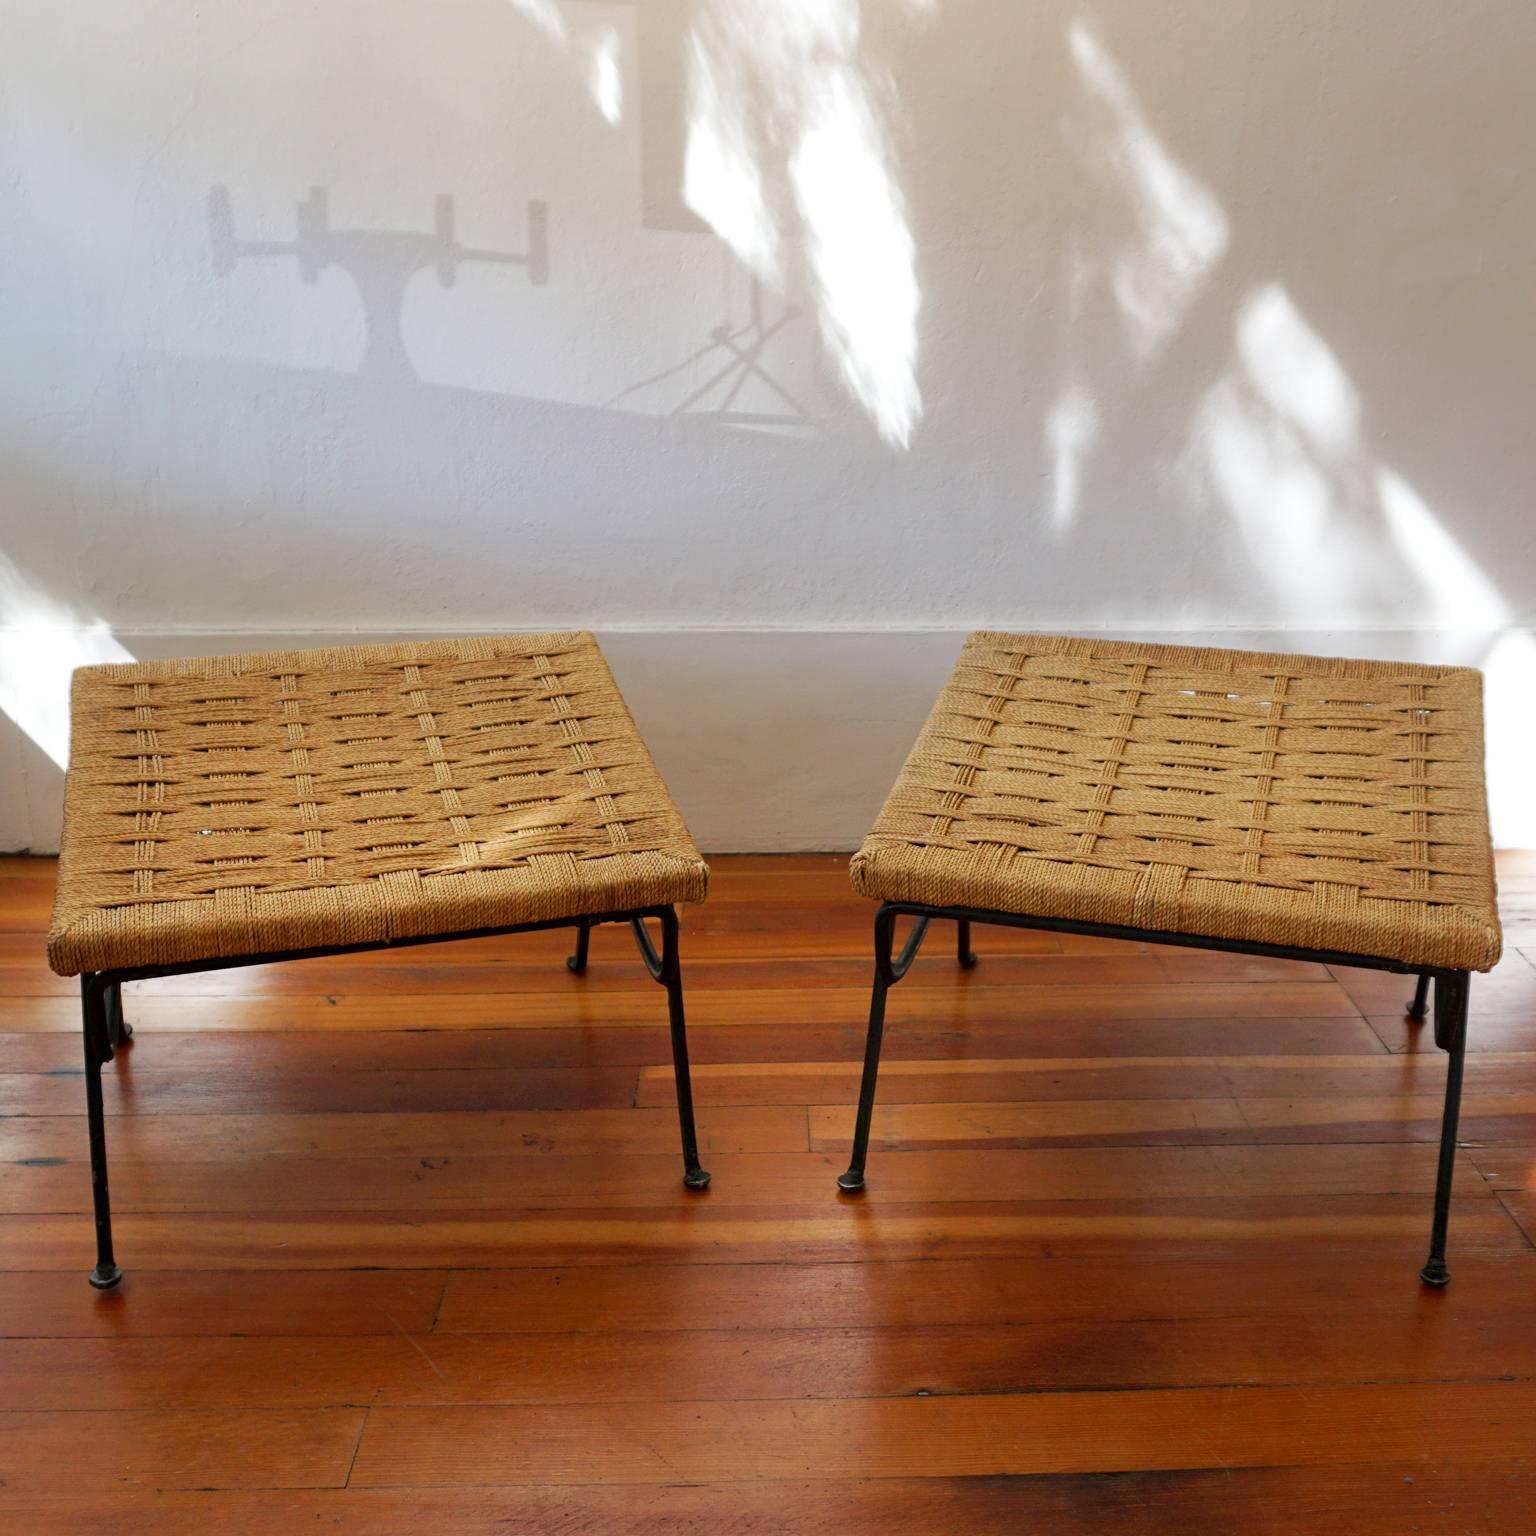 A pair of raffia and iron stools designed by Maurizio Tempestini for Salterini. Made in Italy, 1950s.

The 1950s photo is architect Paul R Williams sitting on the stool in his backyard.